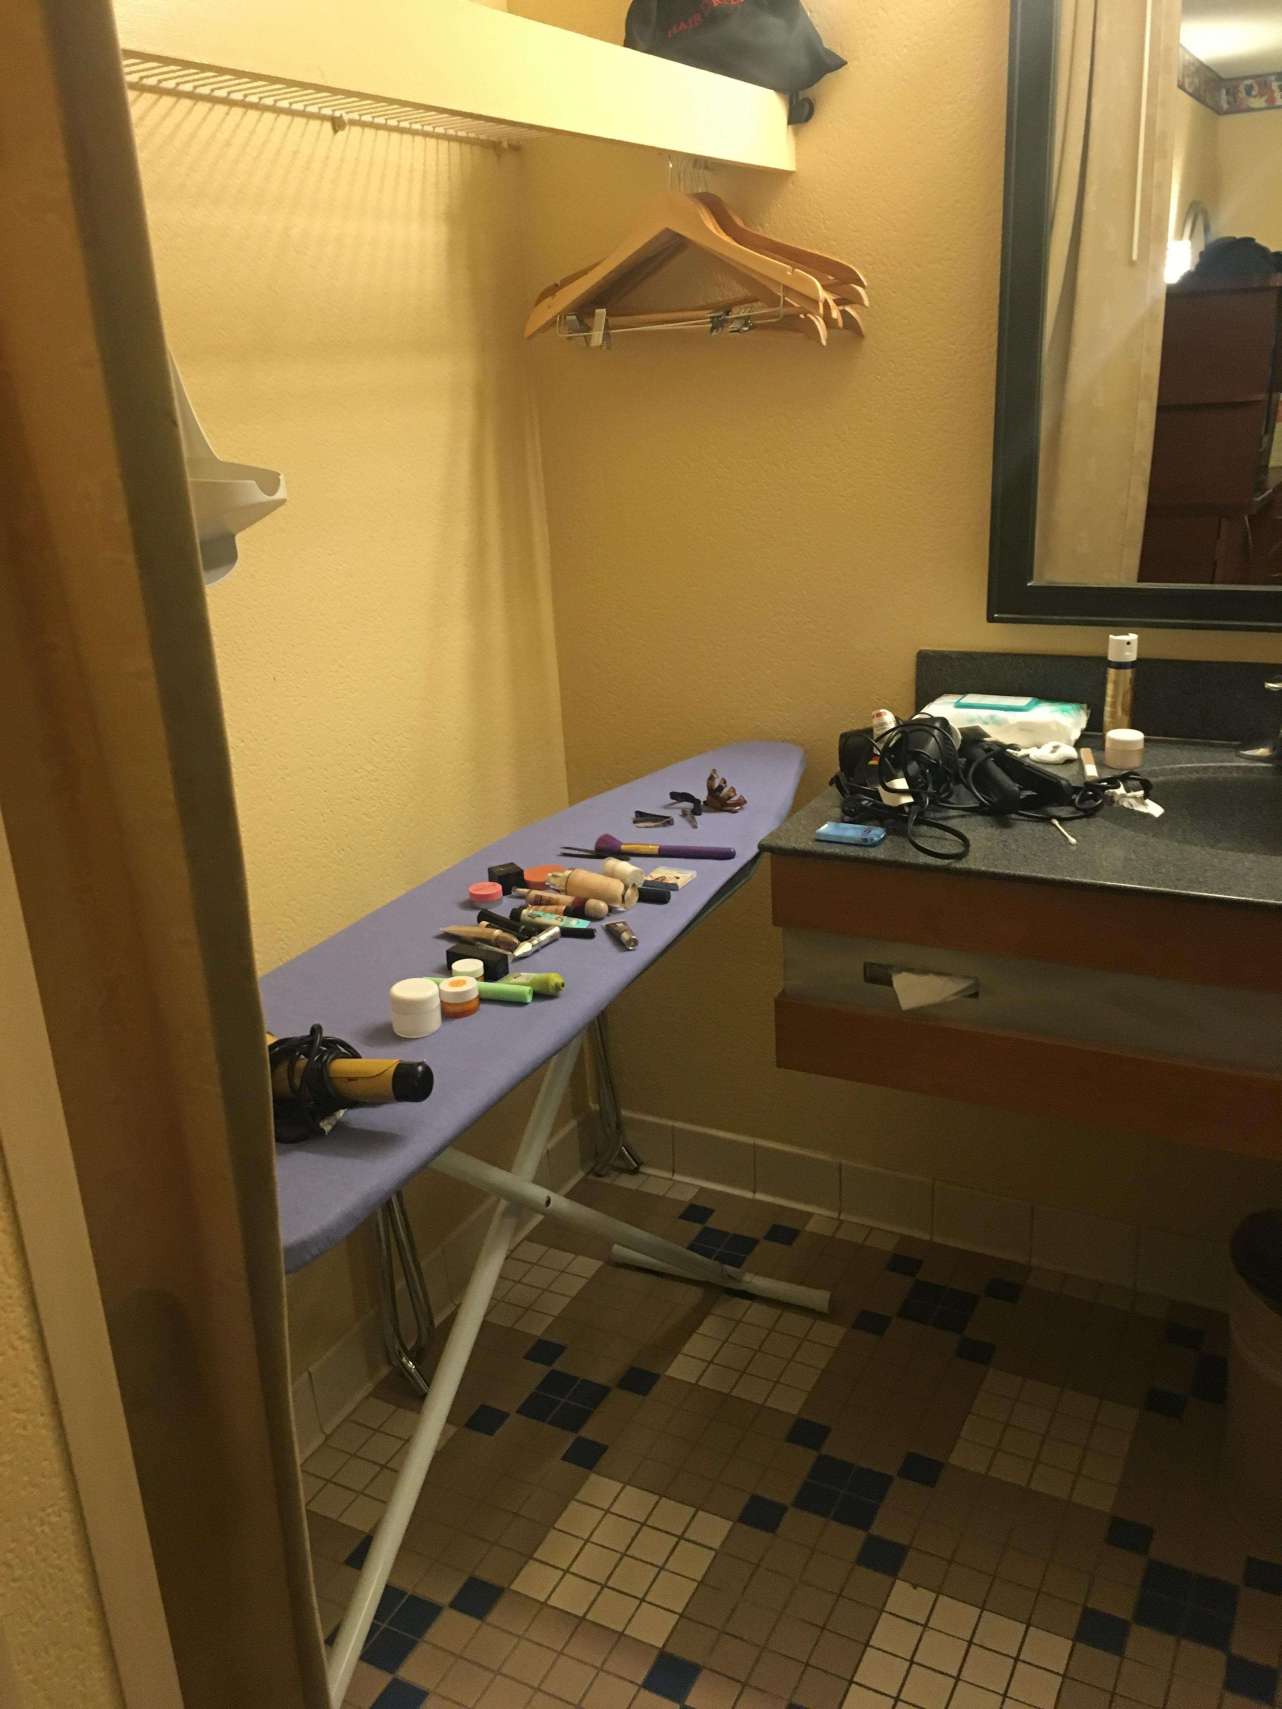 There’s never enough counter space at hotels, so use the iron as a place to spread your shit out.